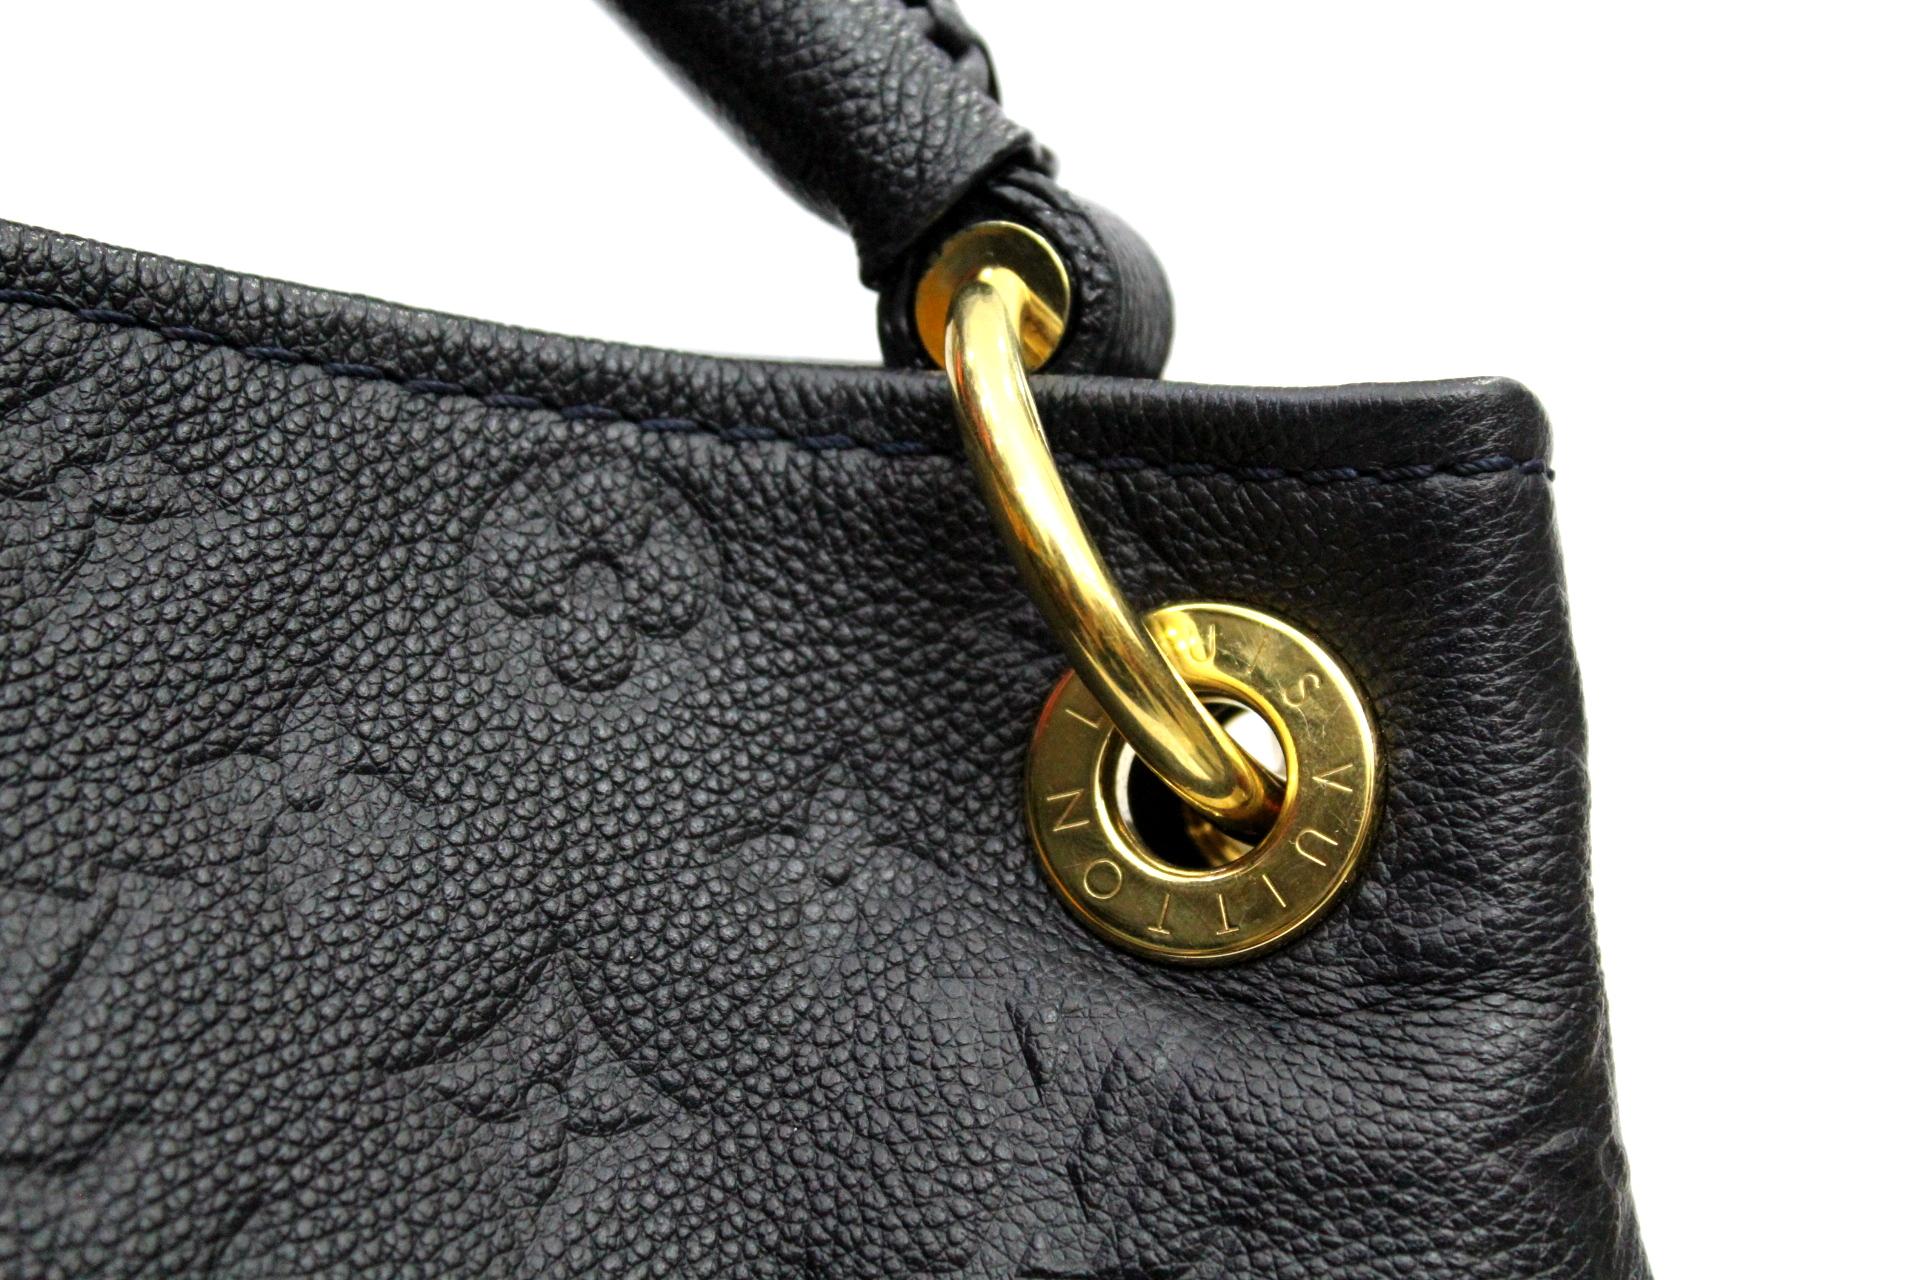 The Louis Vuitton Monogram Empreinte Leather Artsy MM Bag has a unique and modern structure. This roomy tote makes a perfect work or weekend bag, large enough to hold all your essentials in style. Made from the highest quality calfskin leather, this